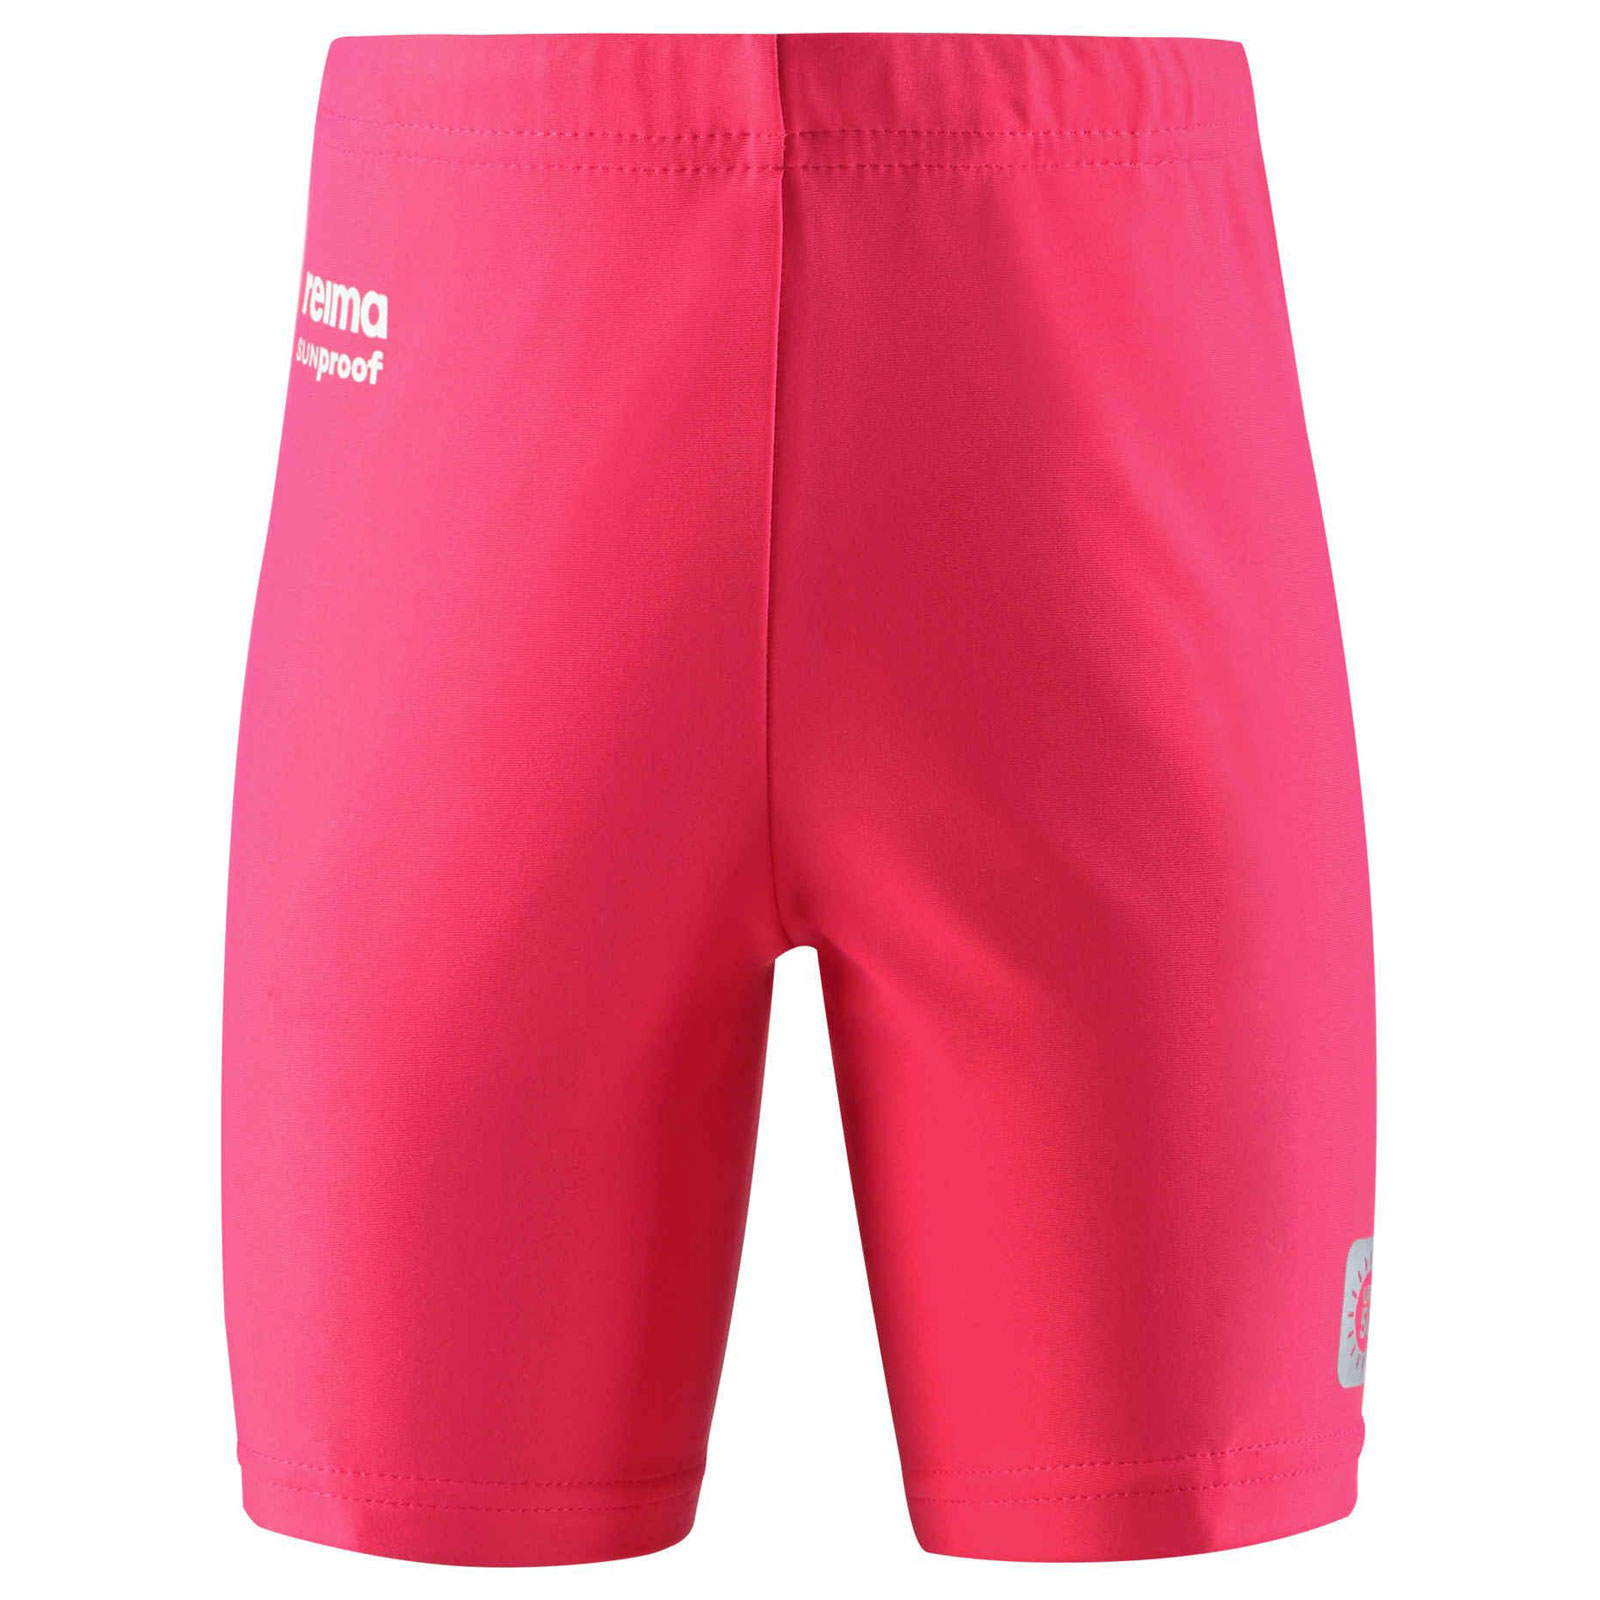 Picture of Reima Hawaii Swim Trunks Toddler - candy pink 4410